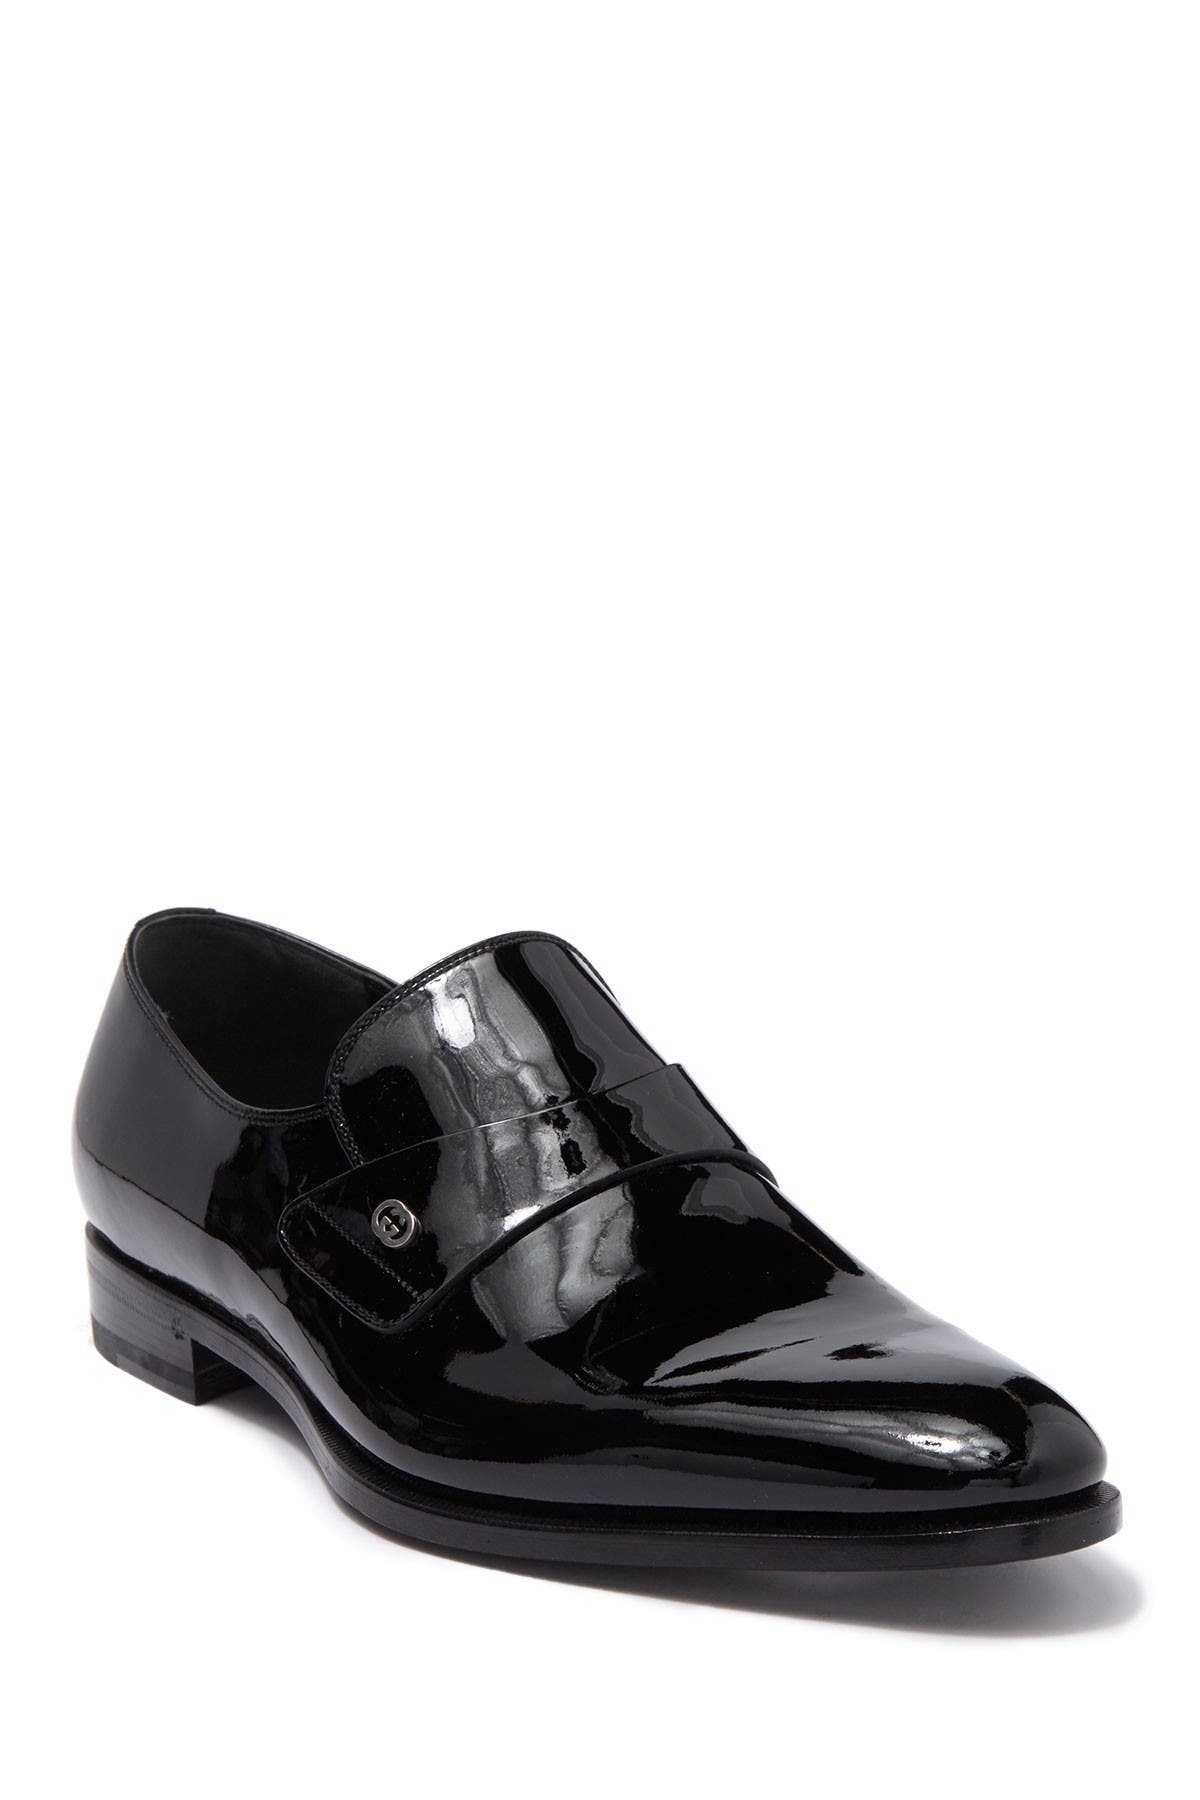 nordstrom rack patent leather shoes